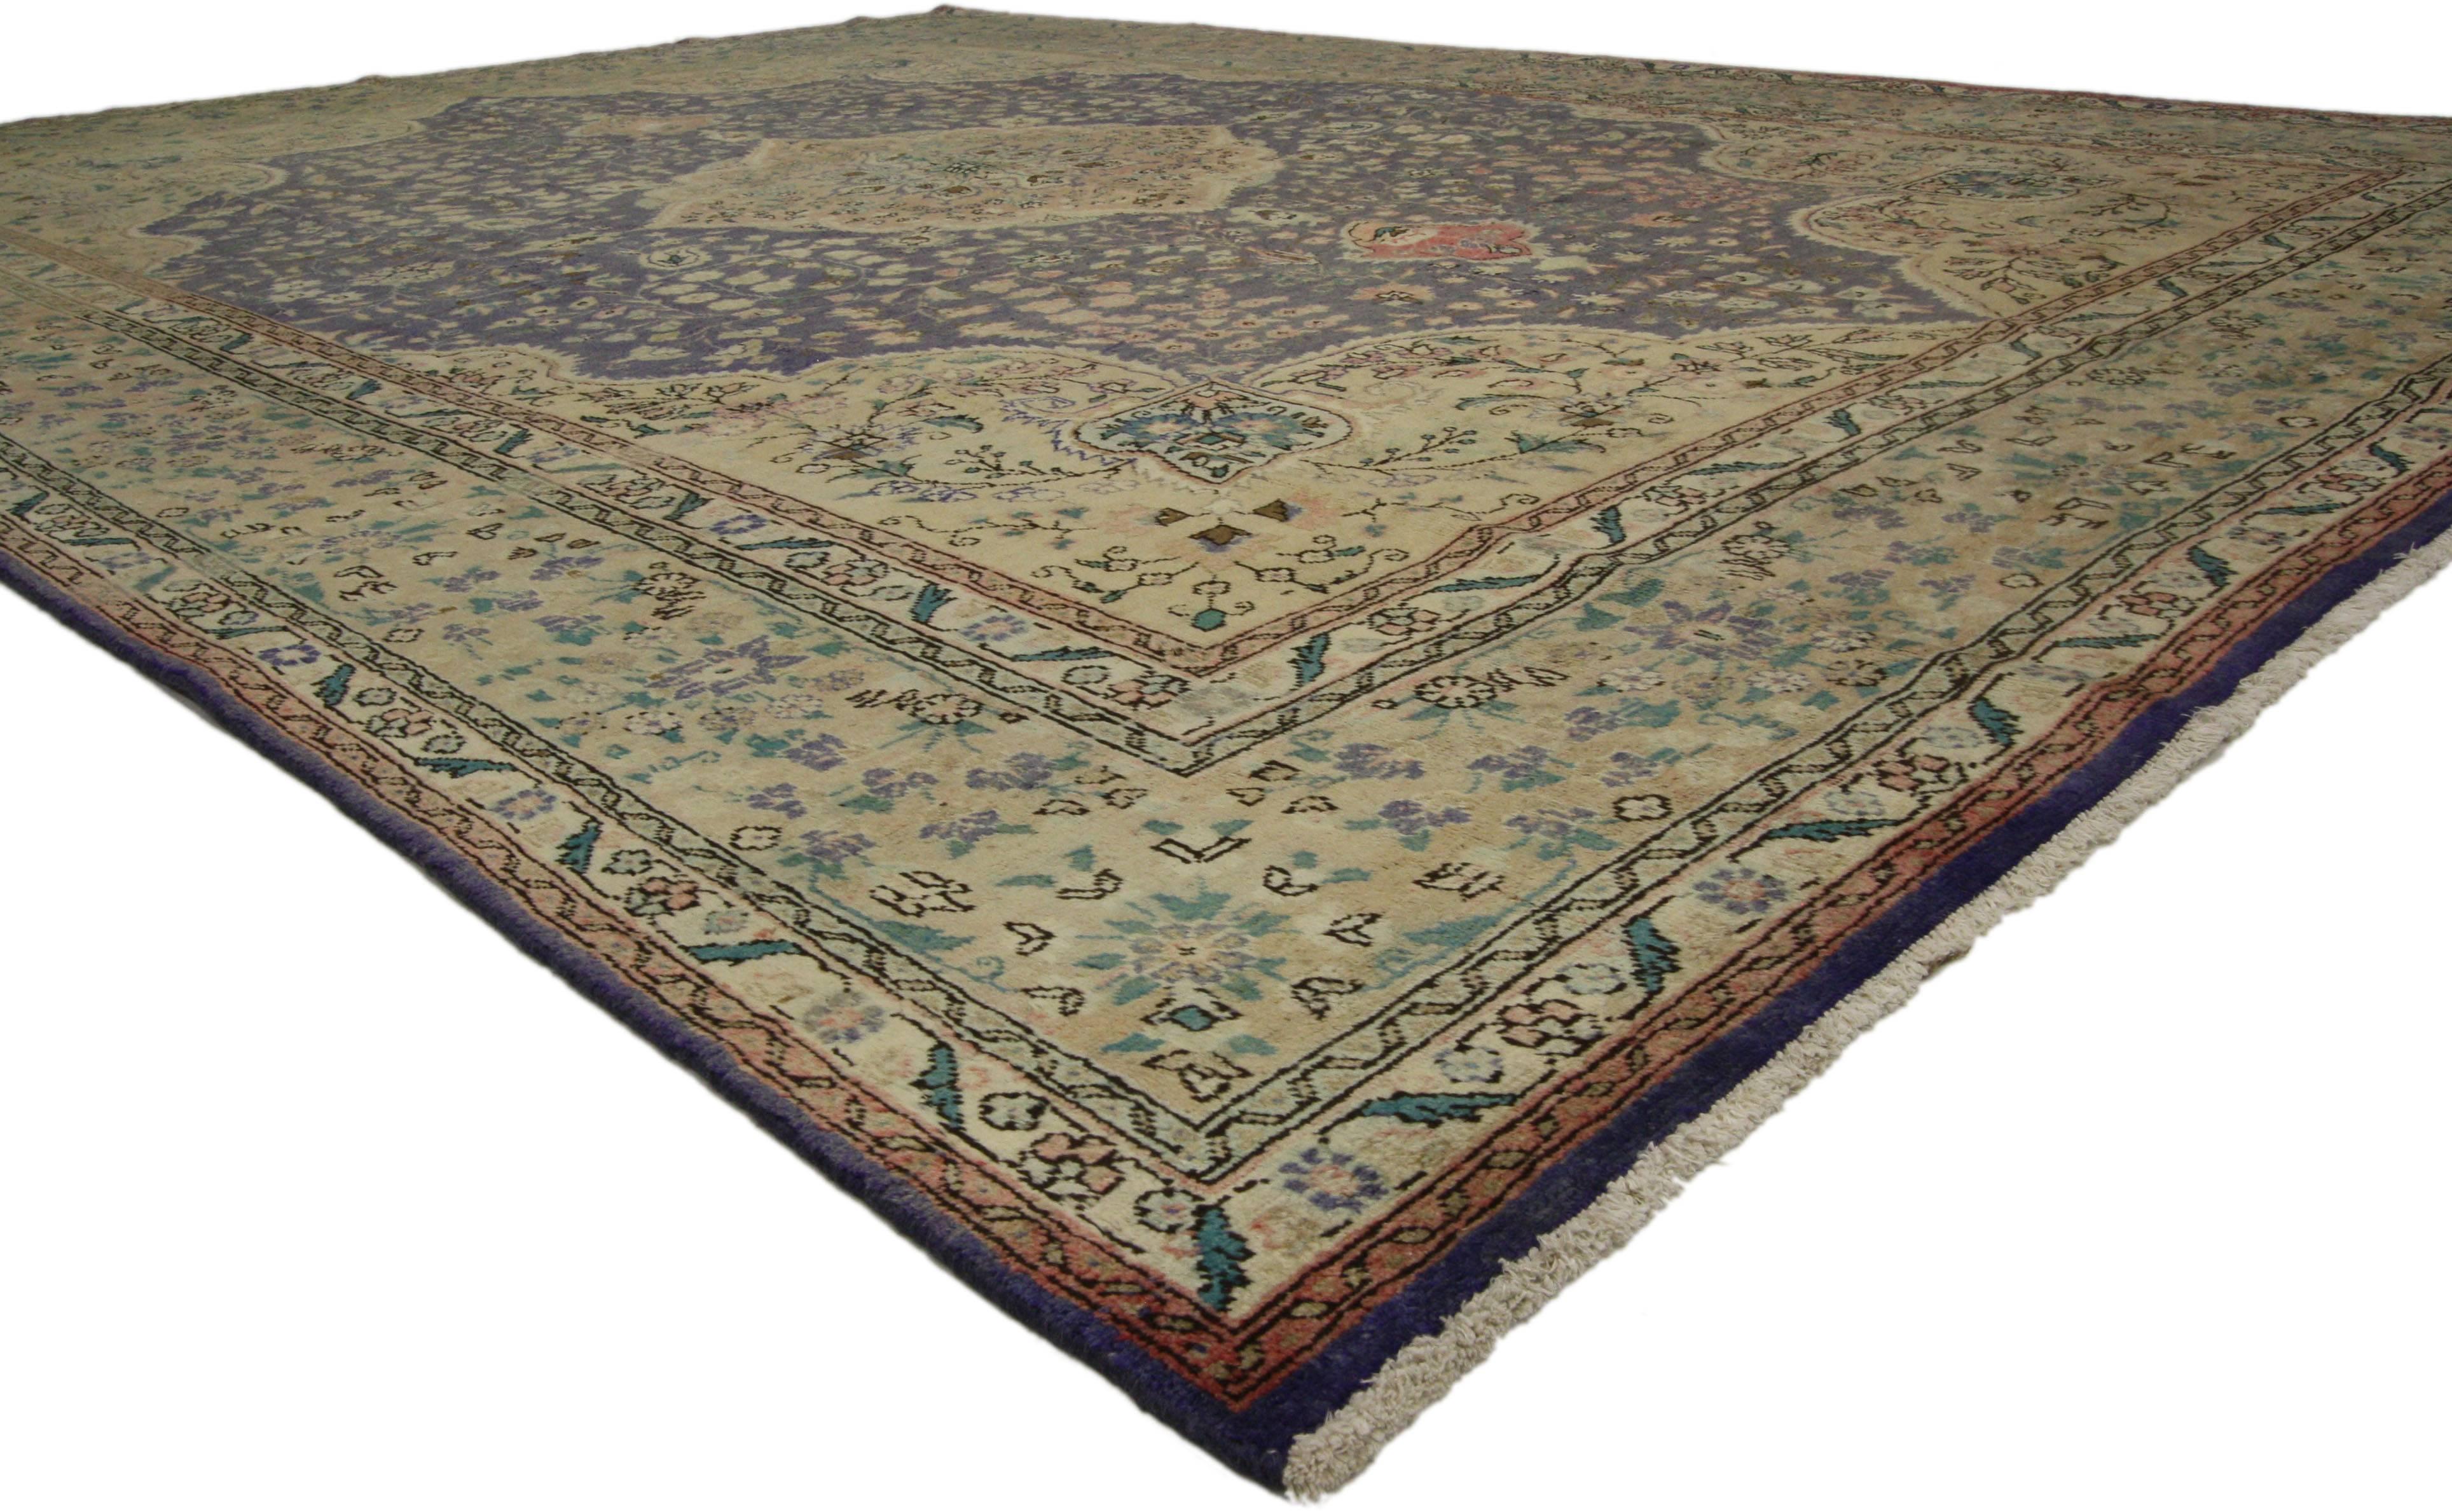 76417 Vintage Persian Tabriz Rug with European Cottage Style  09'10 X 13'00. With its rich detailing and densely ornamented florals, this hand-knotted wool vintage Persian Tabriz rug beautifully embodies European Cottage style. It features a cusped